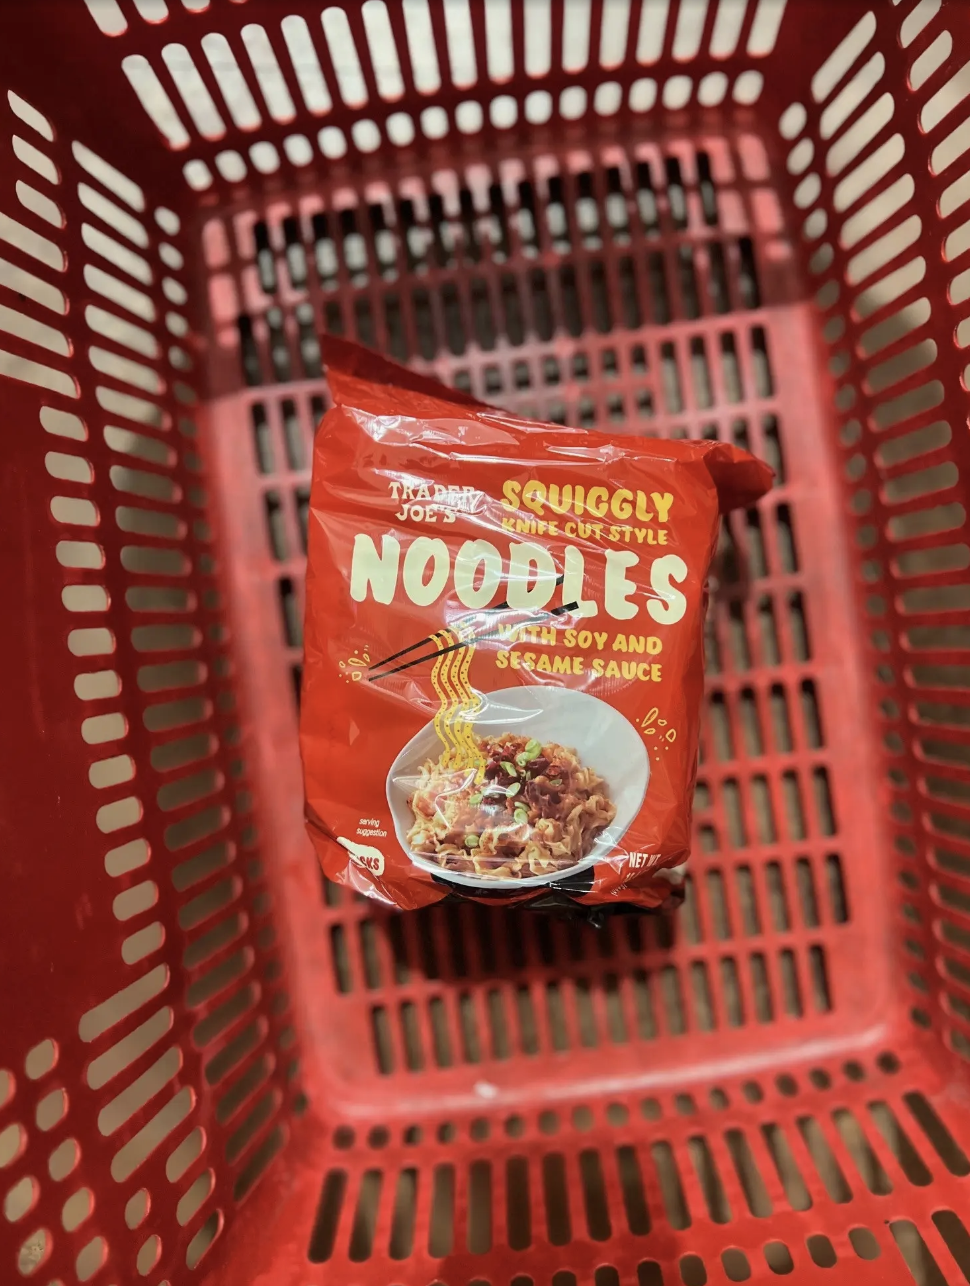 Squiggly Knife Cut Noodles in a shopping basket